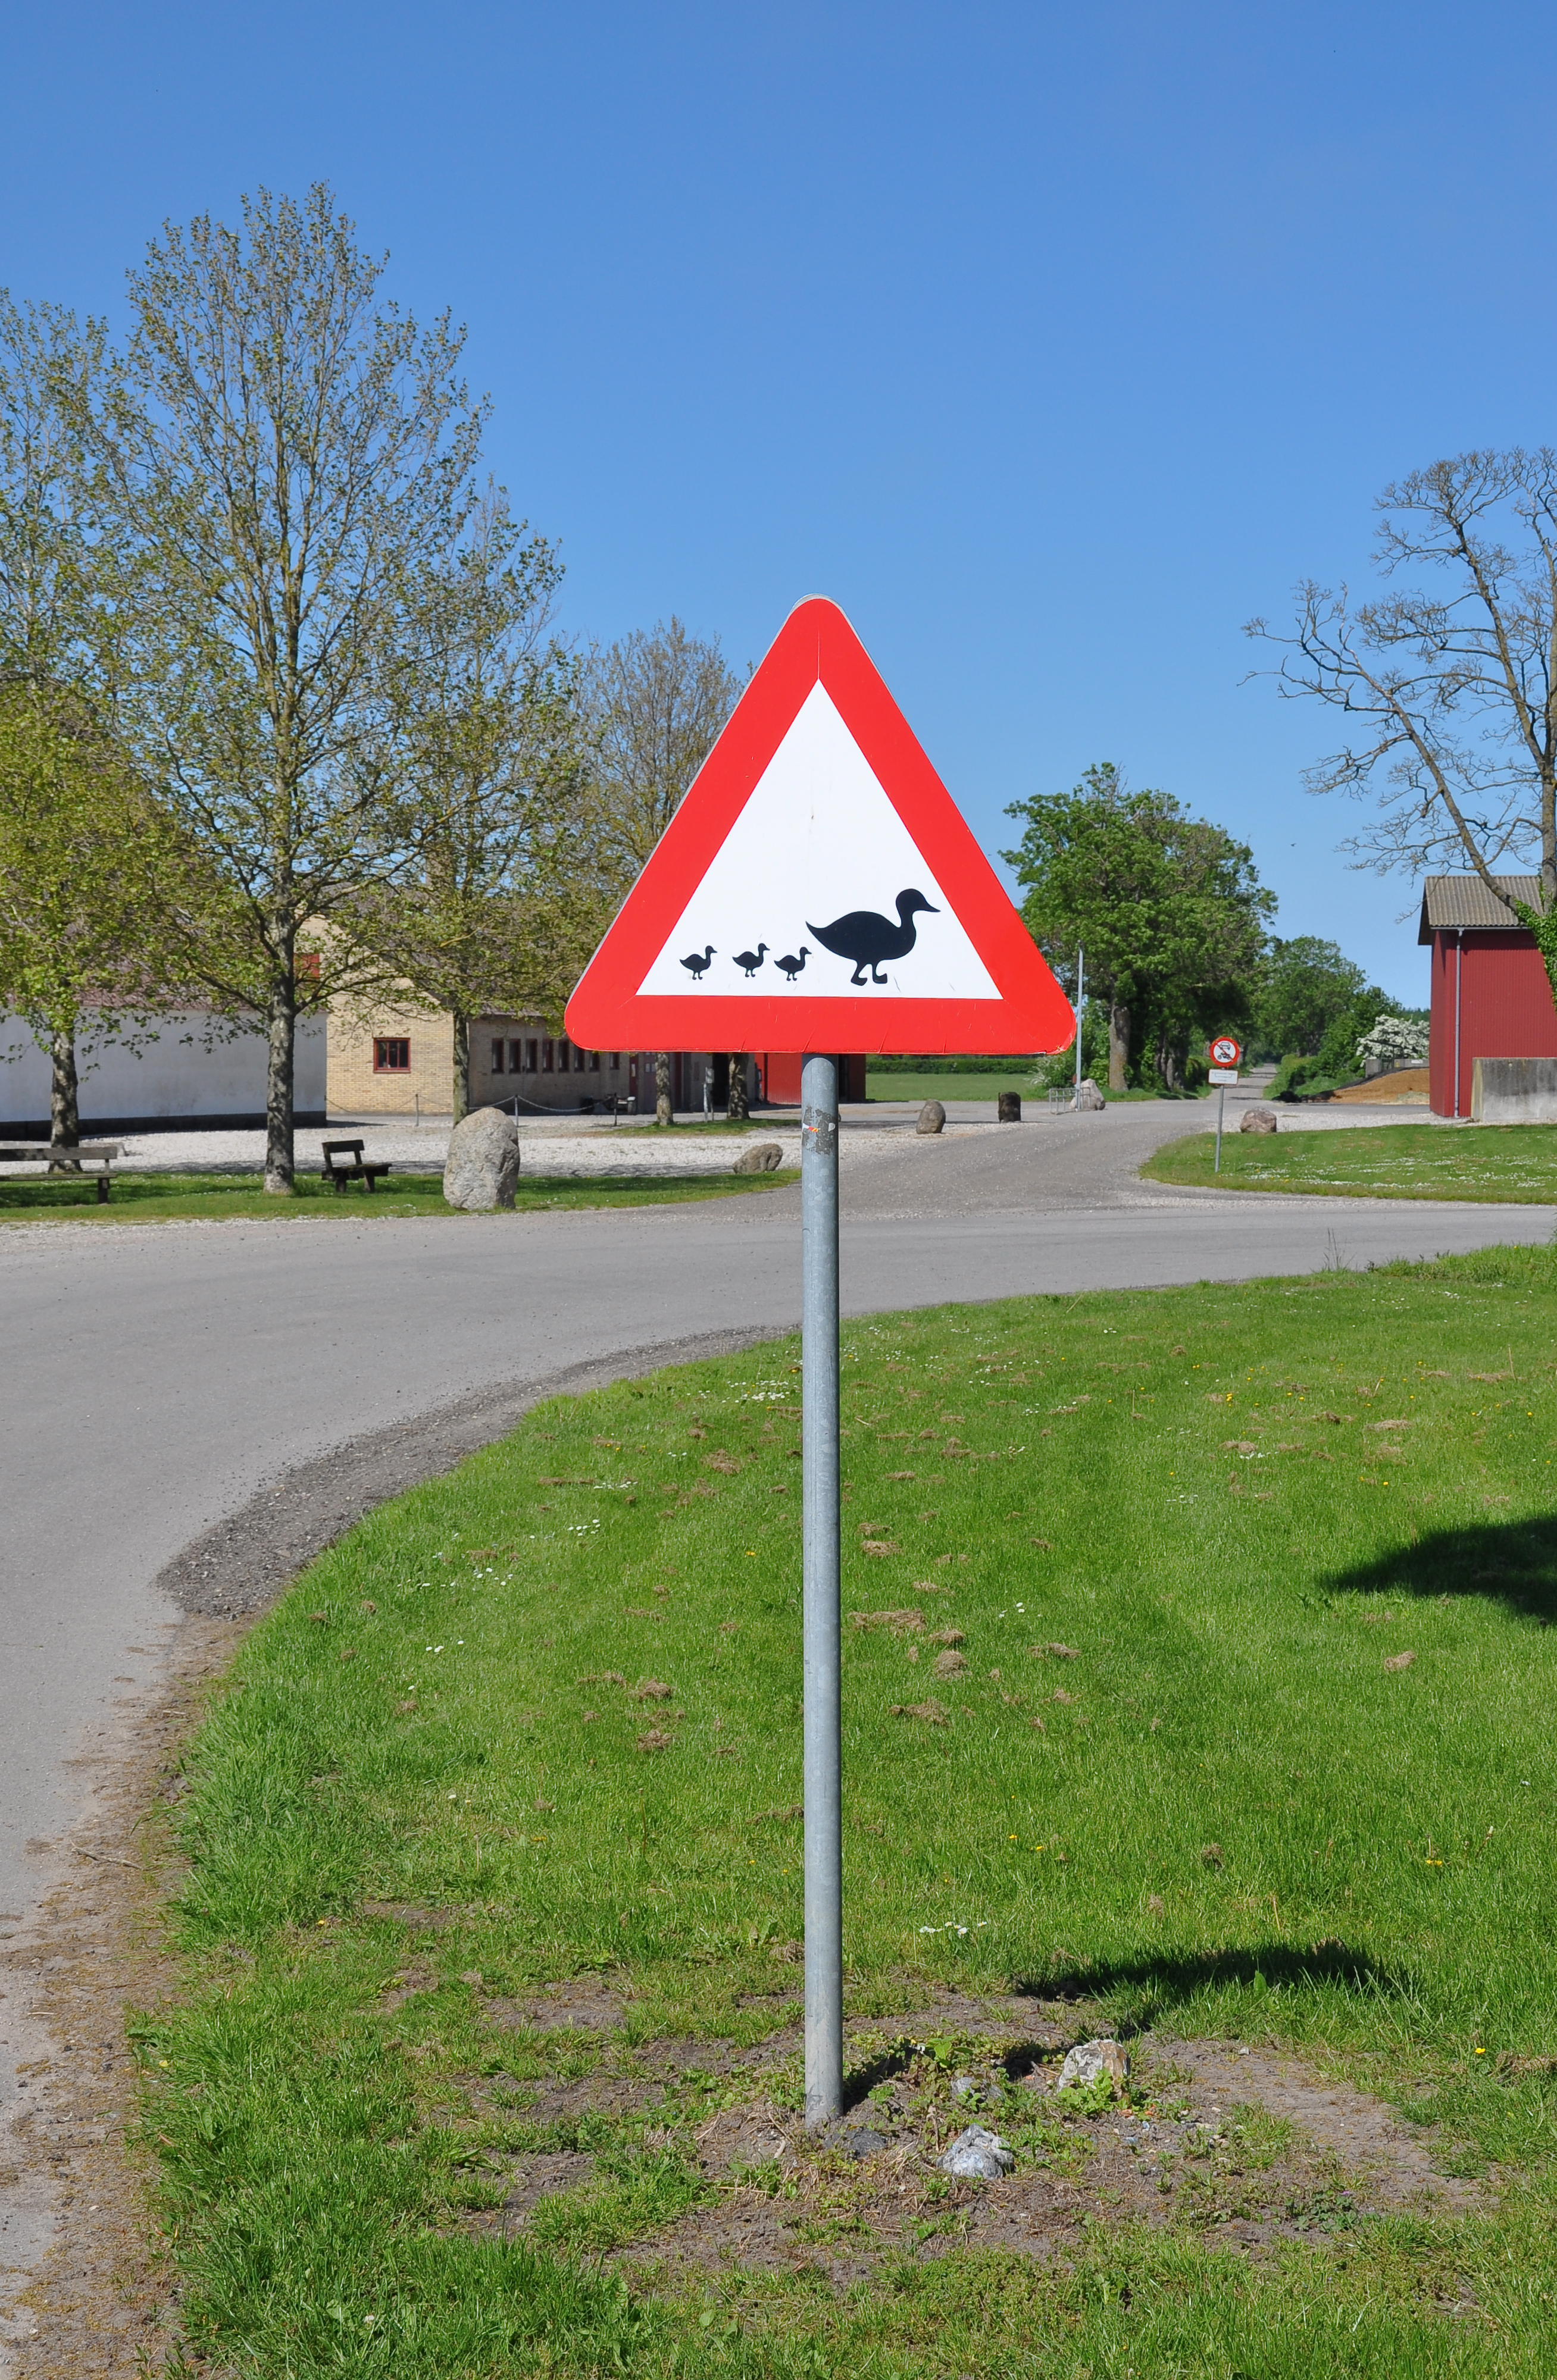 Duckling road sign